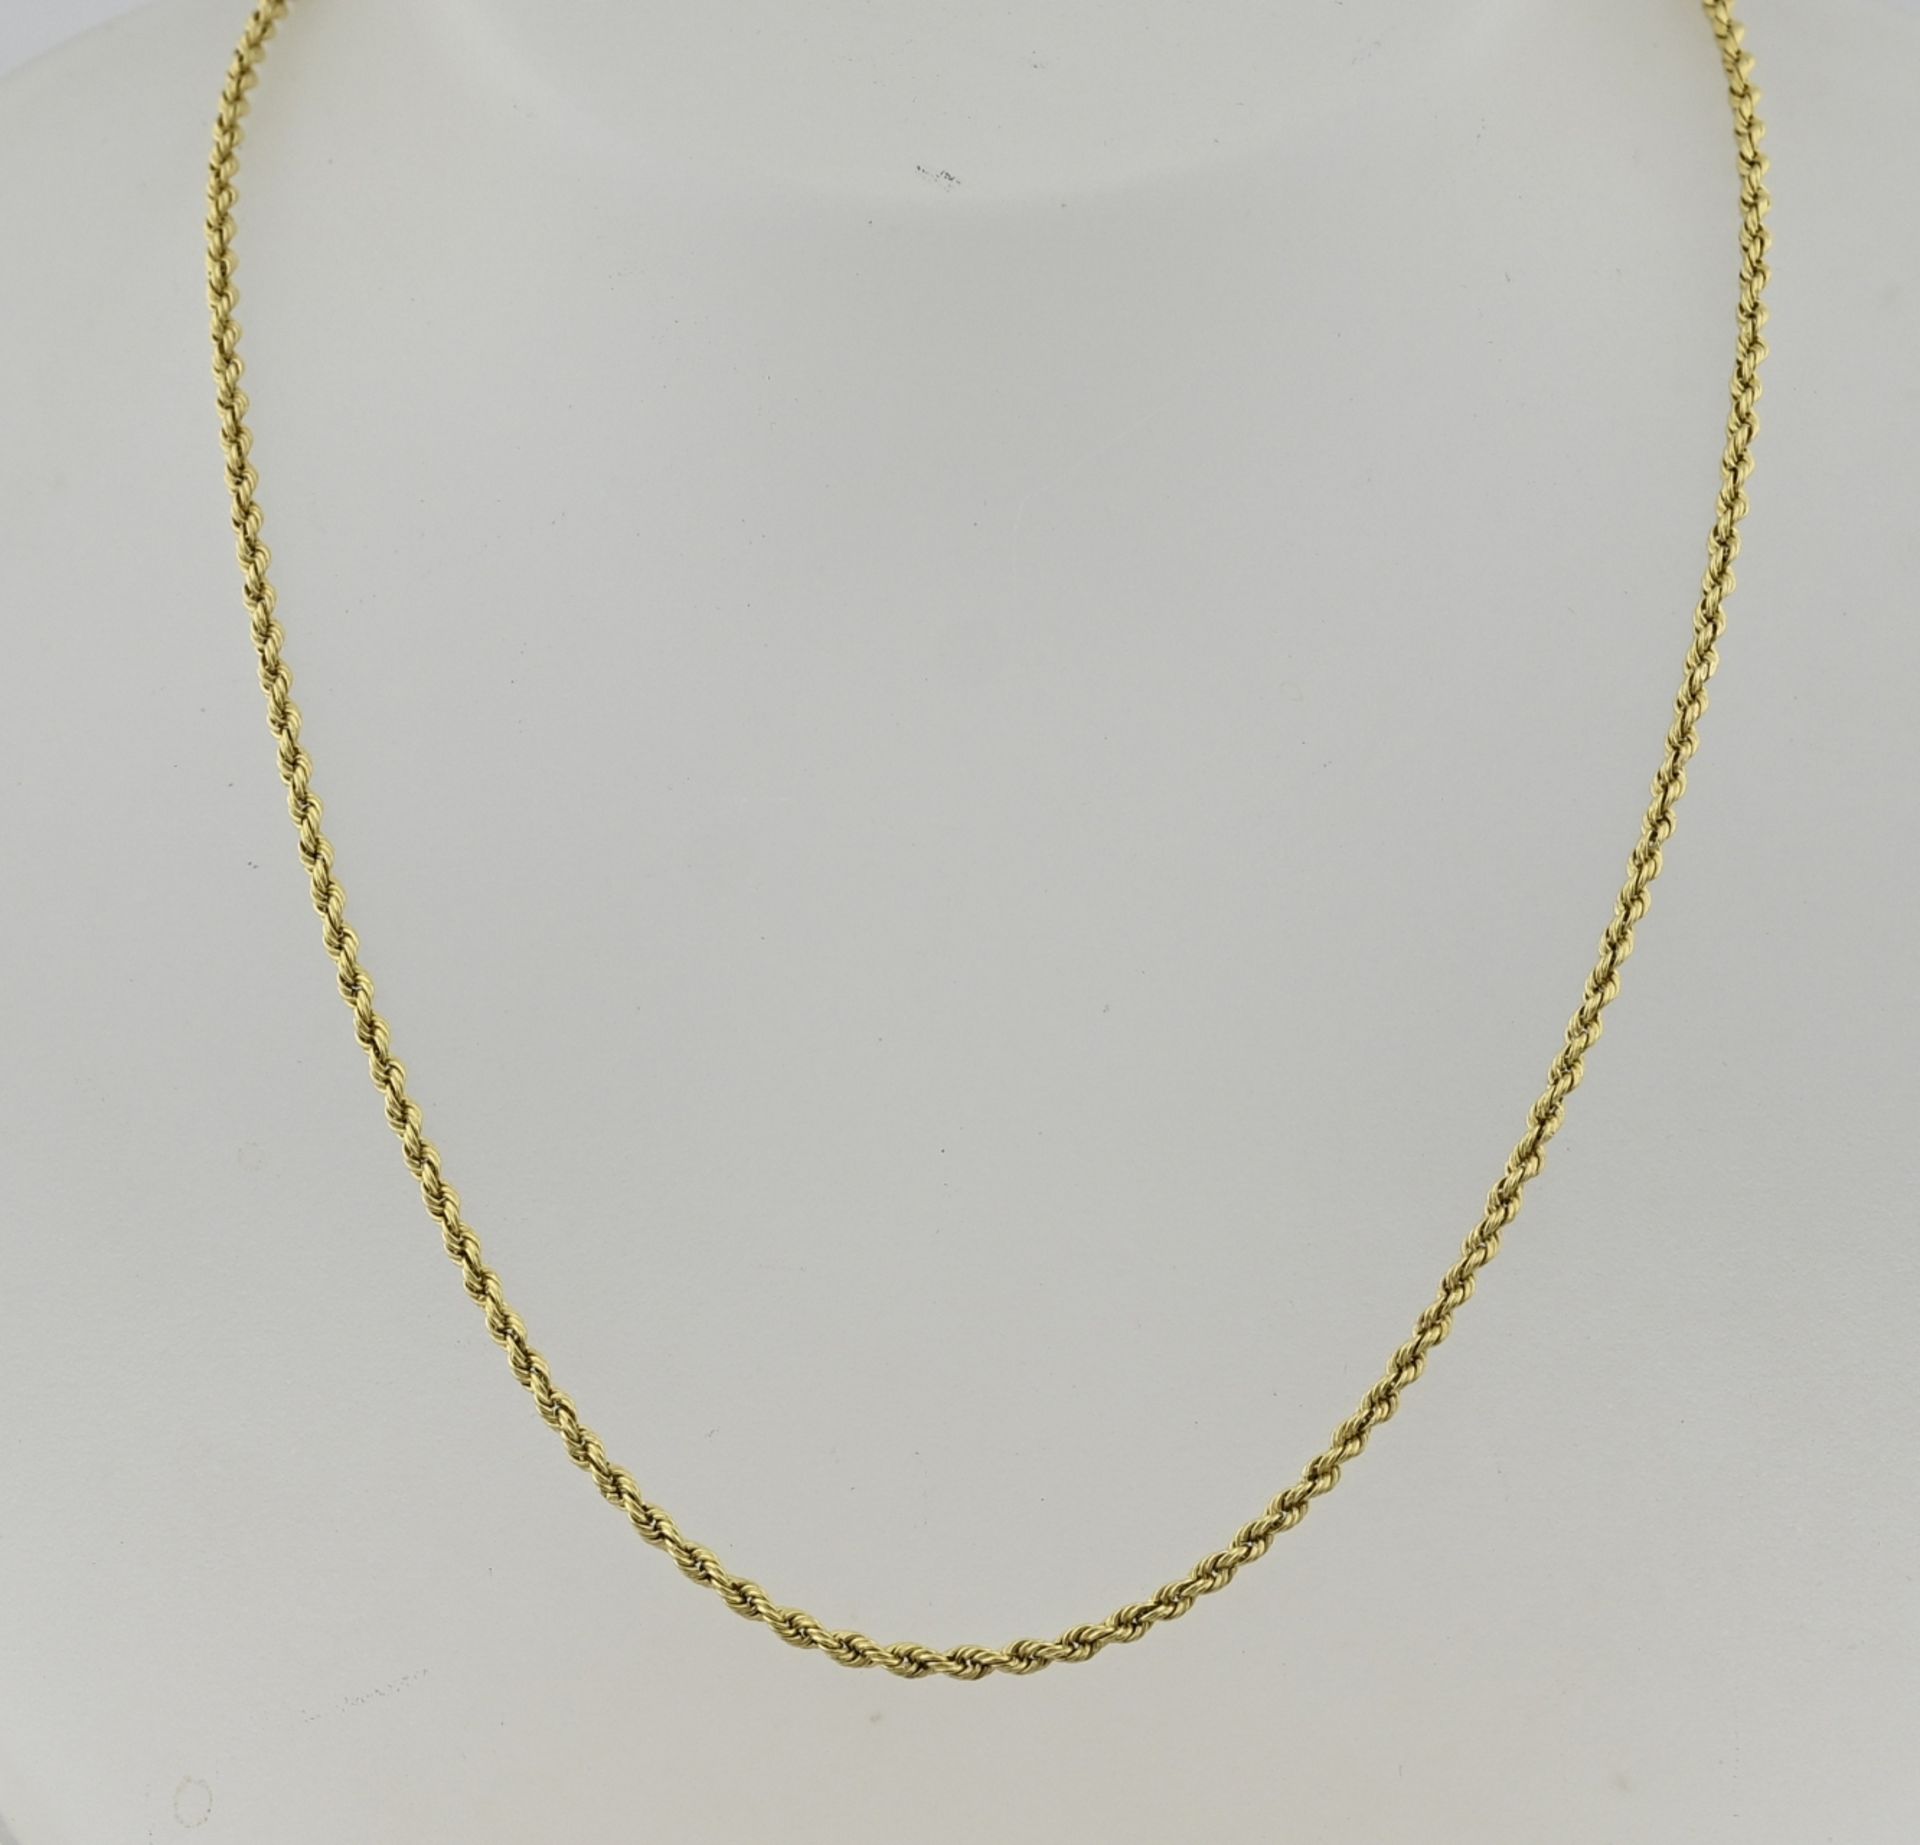 Gold cord necklace